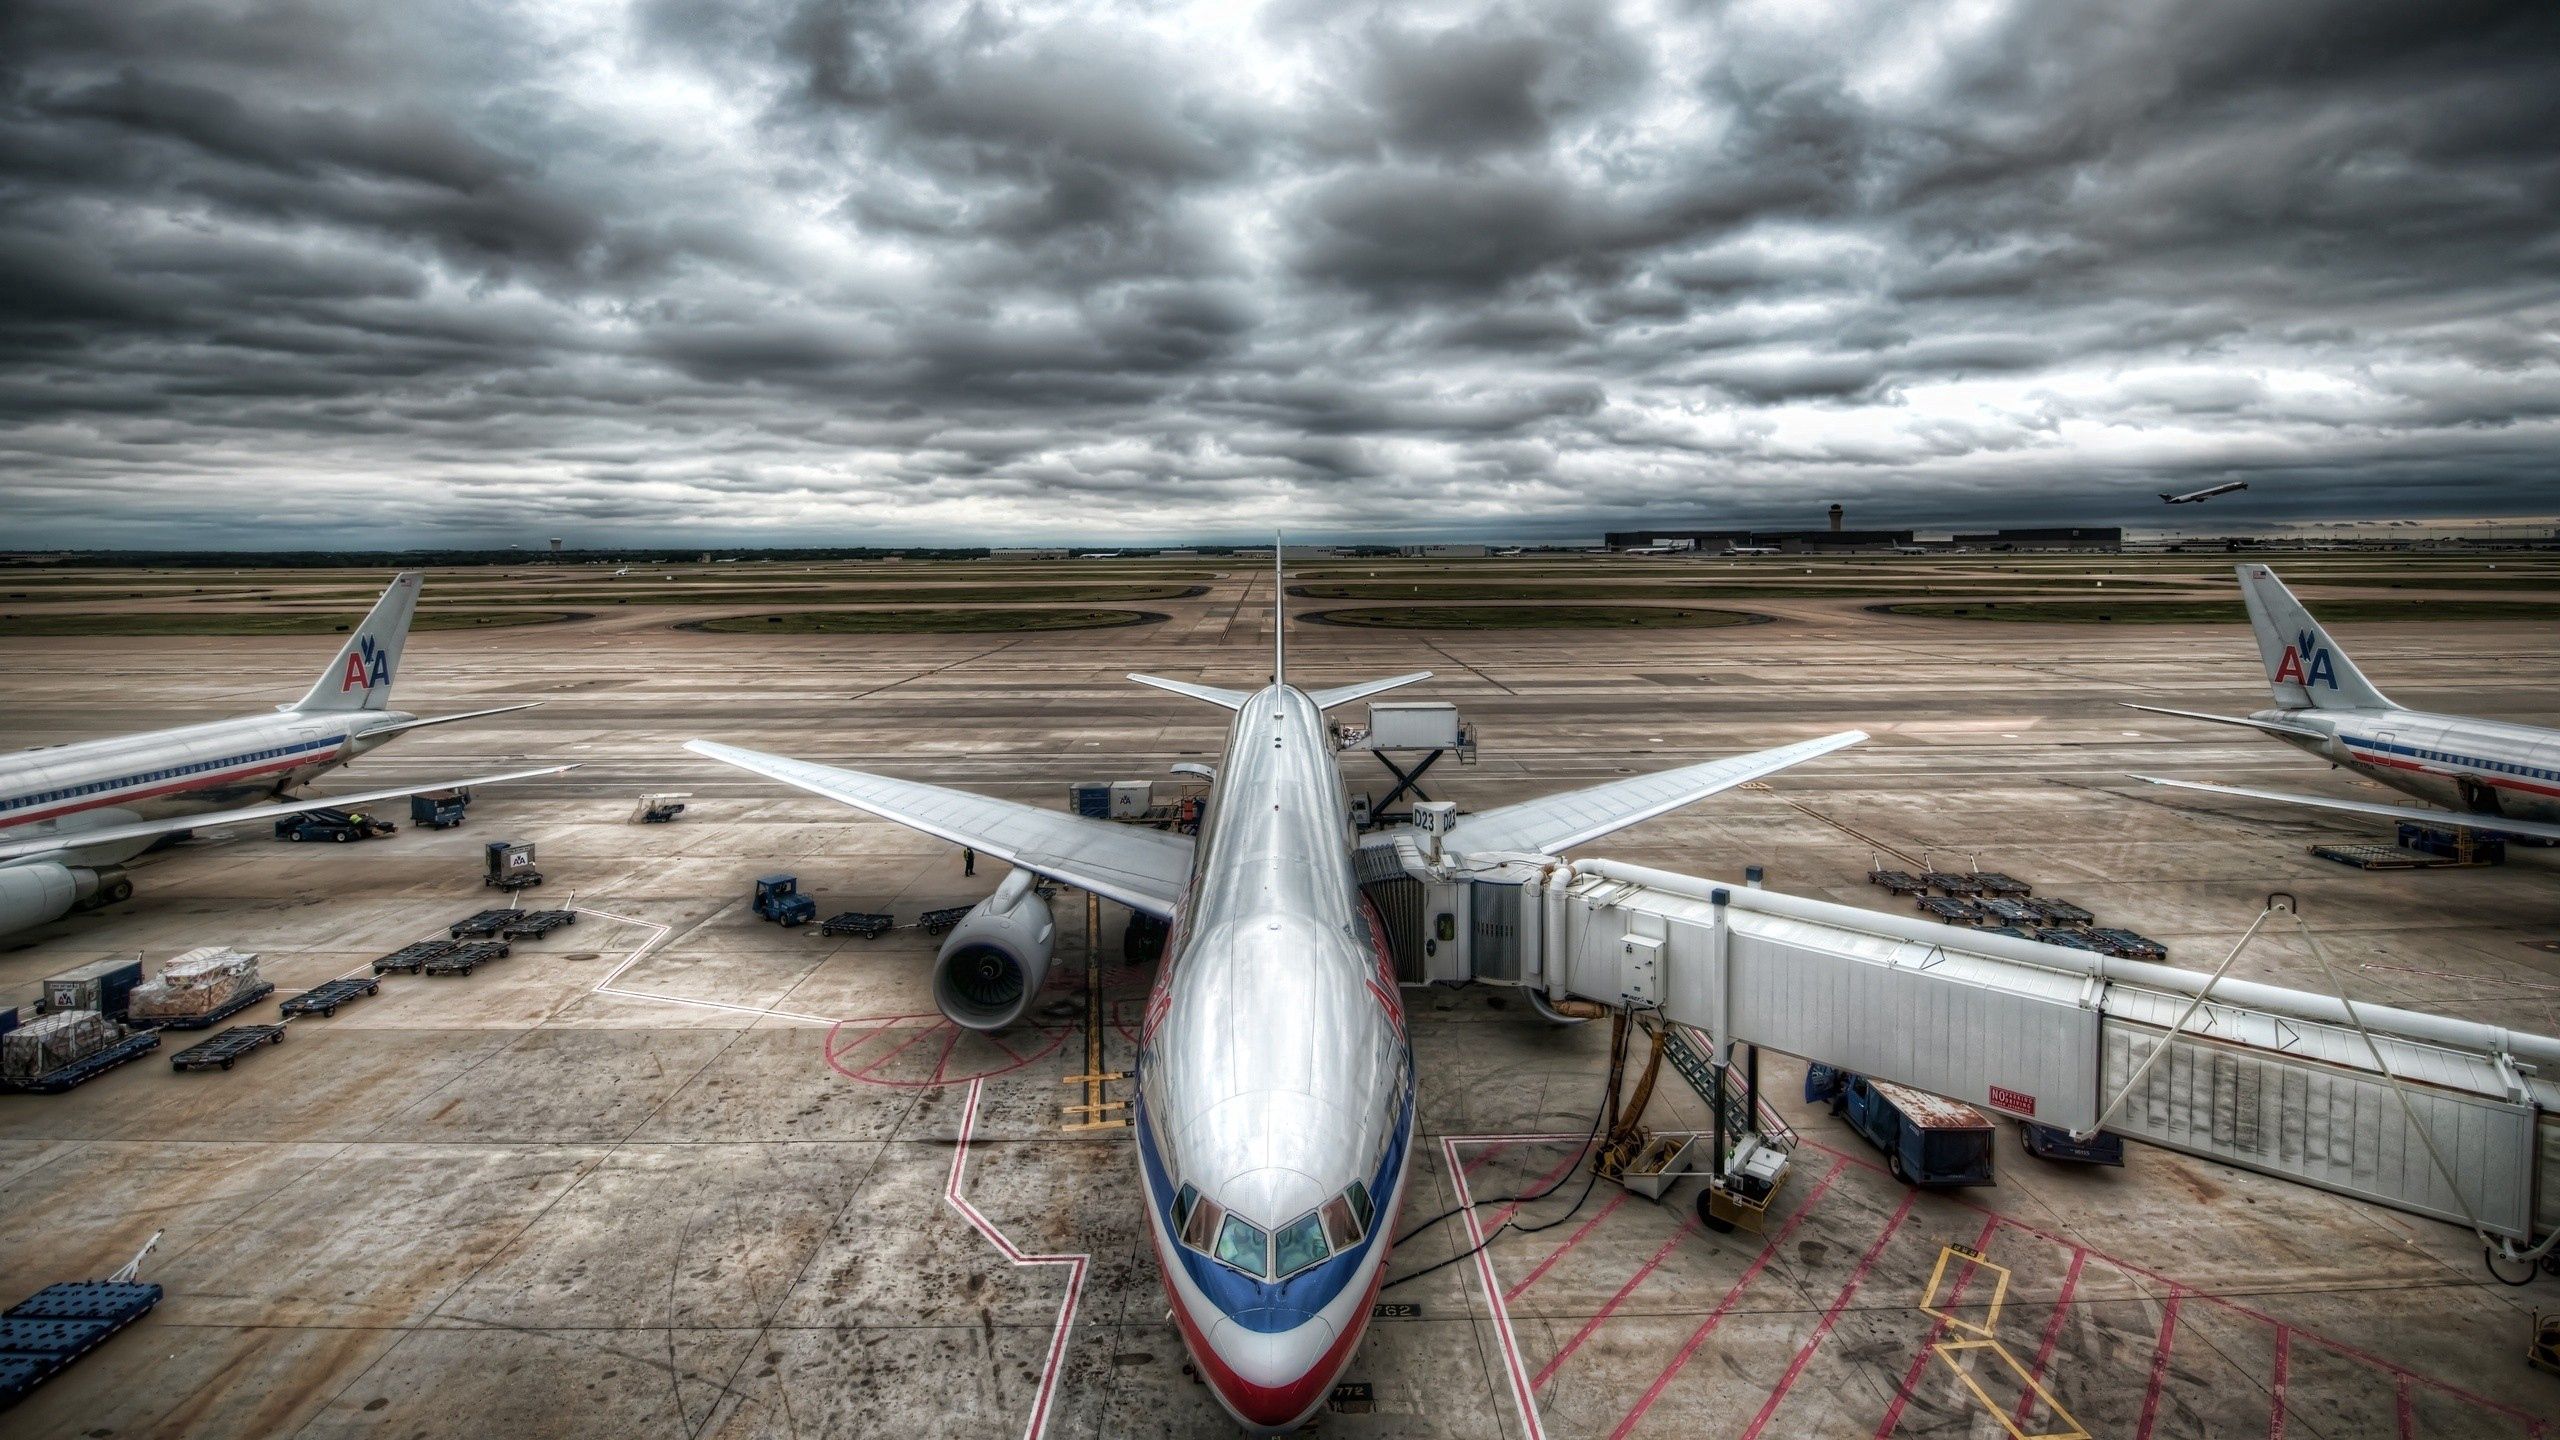 android plane, sky, clouds, miscellanea, miscellaneous, airplane, hdr, airport